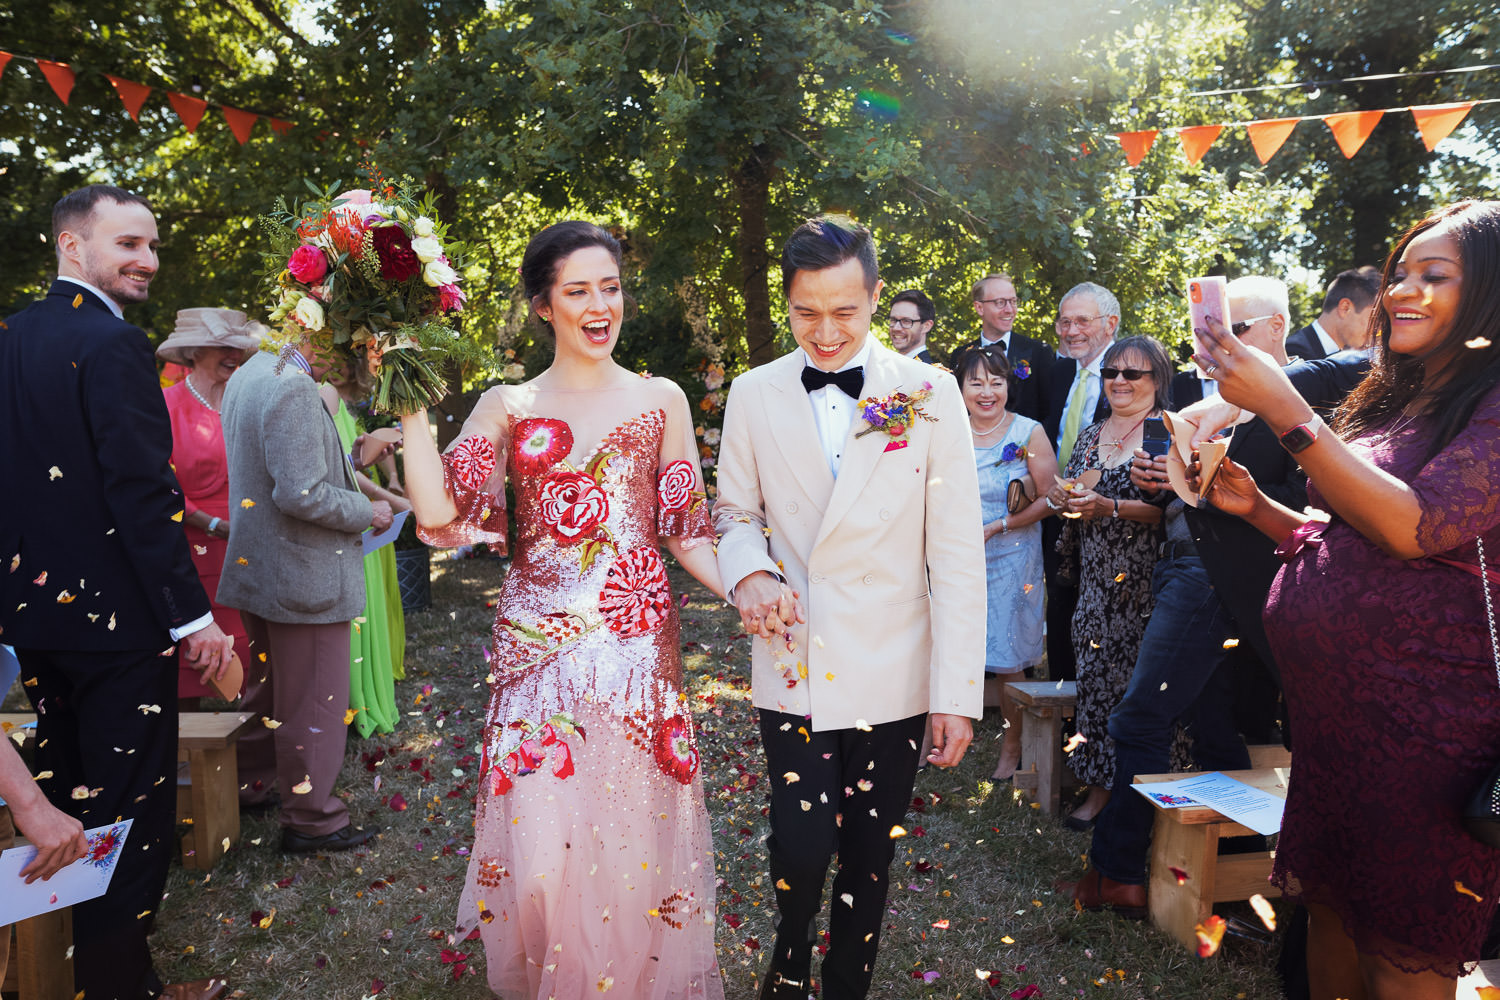 At a garden wedding a bride and groom walk through confetti. The bride is wearing a Temperley carnation sequin gown and the groom is wearing black tie, in a white dinner jacket.